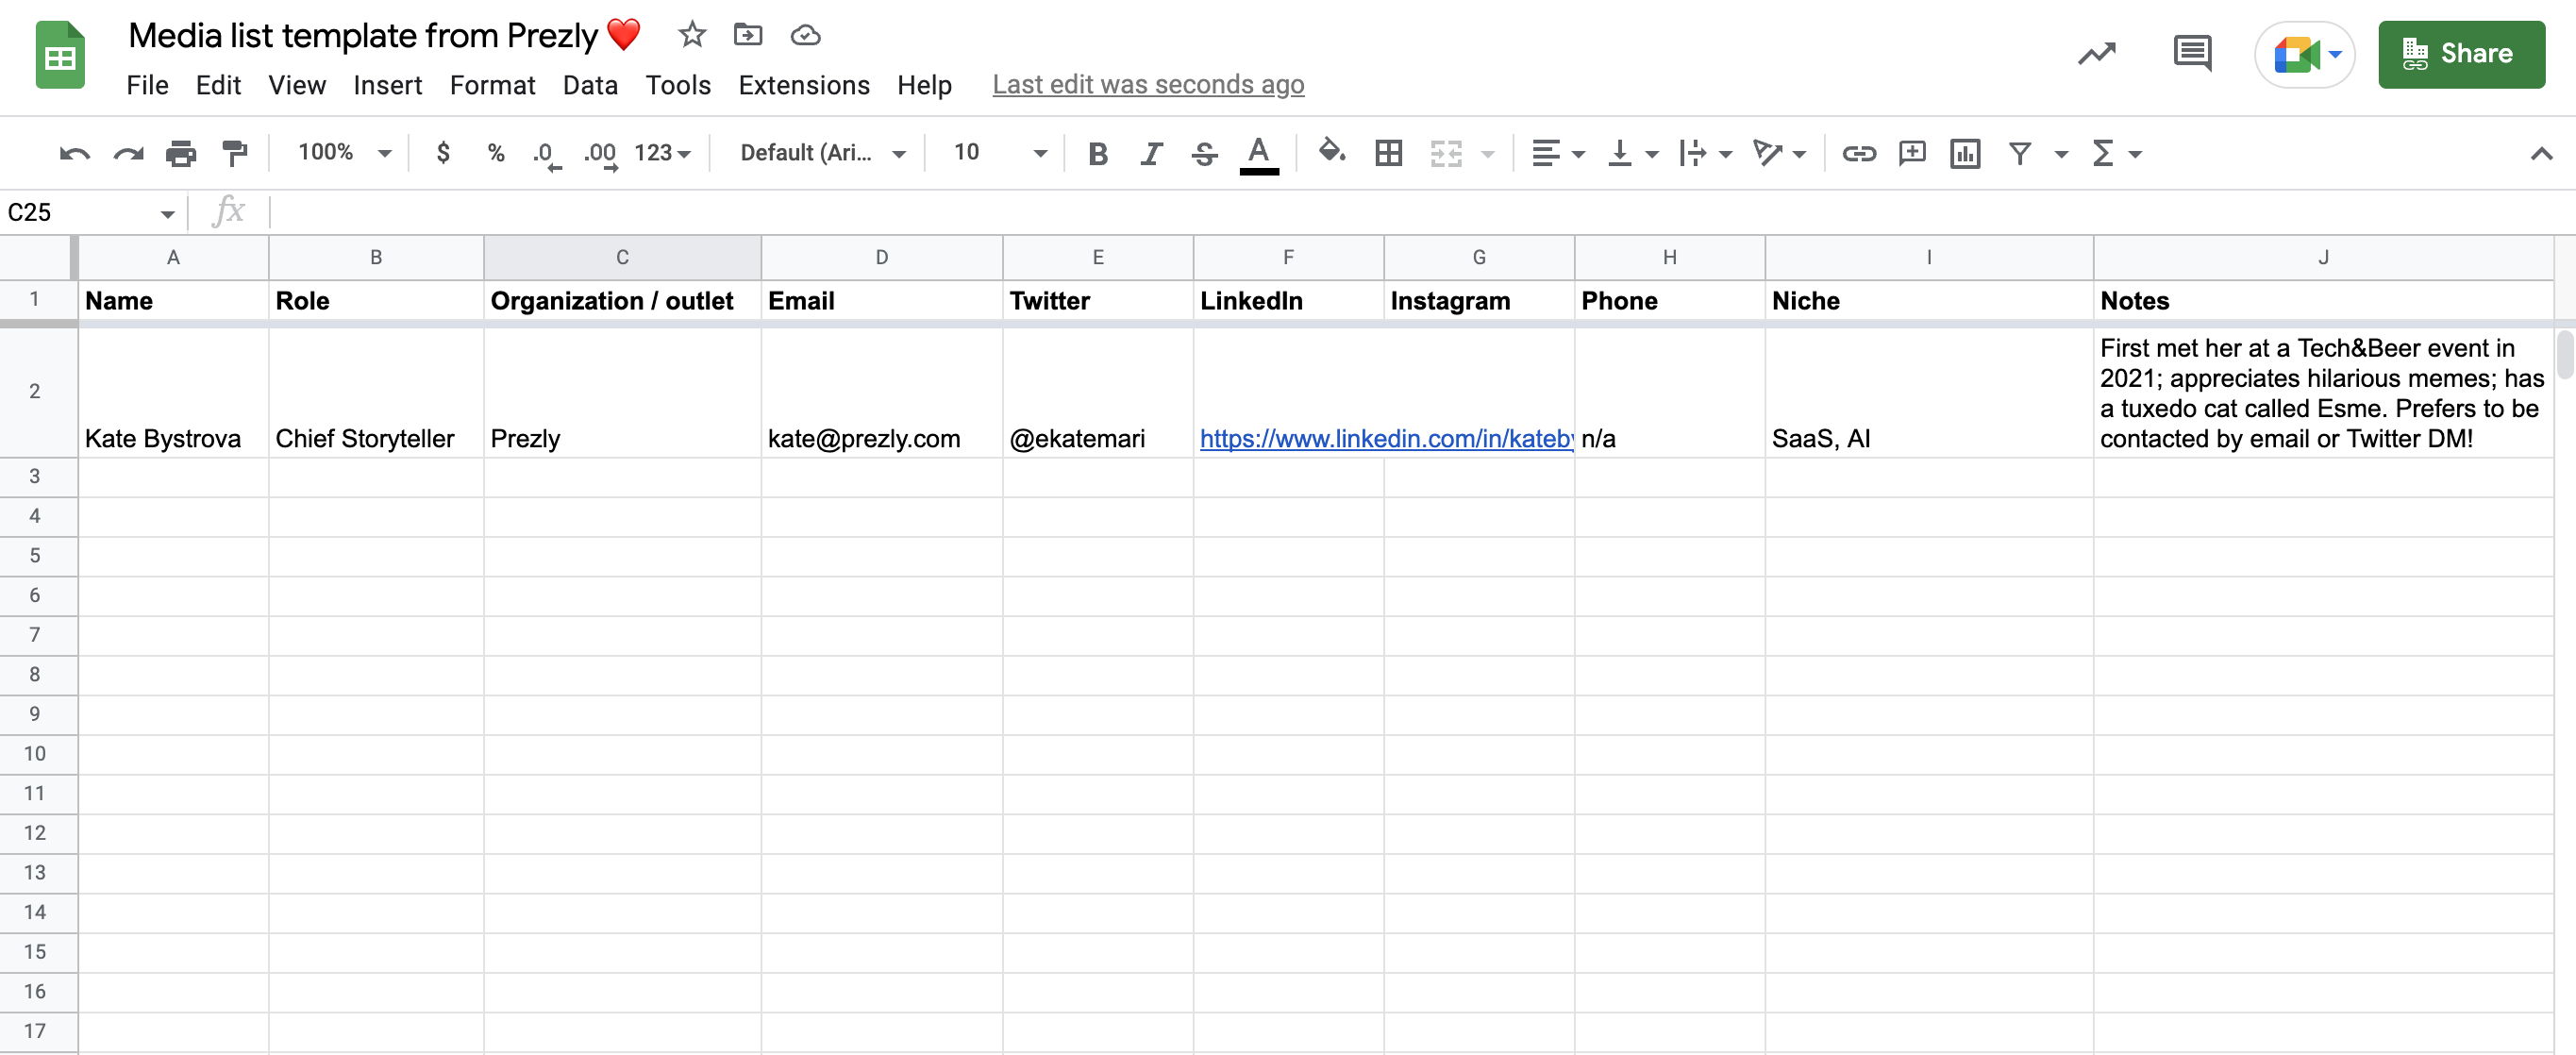 [browser] Click to open the Google Sheets media list template, and select File &gt; Copy to use